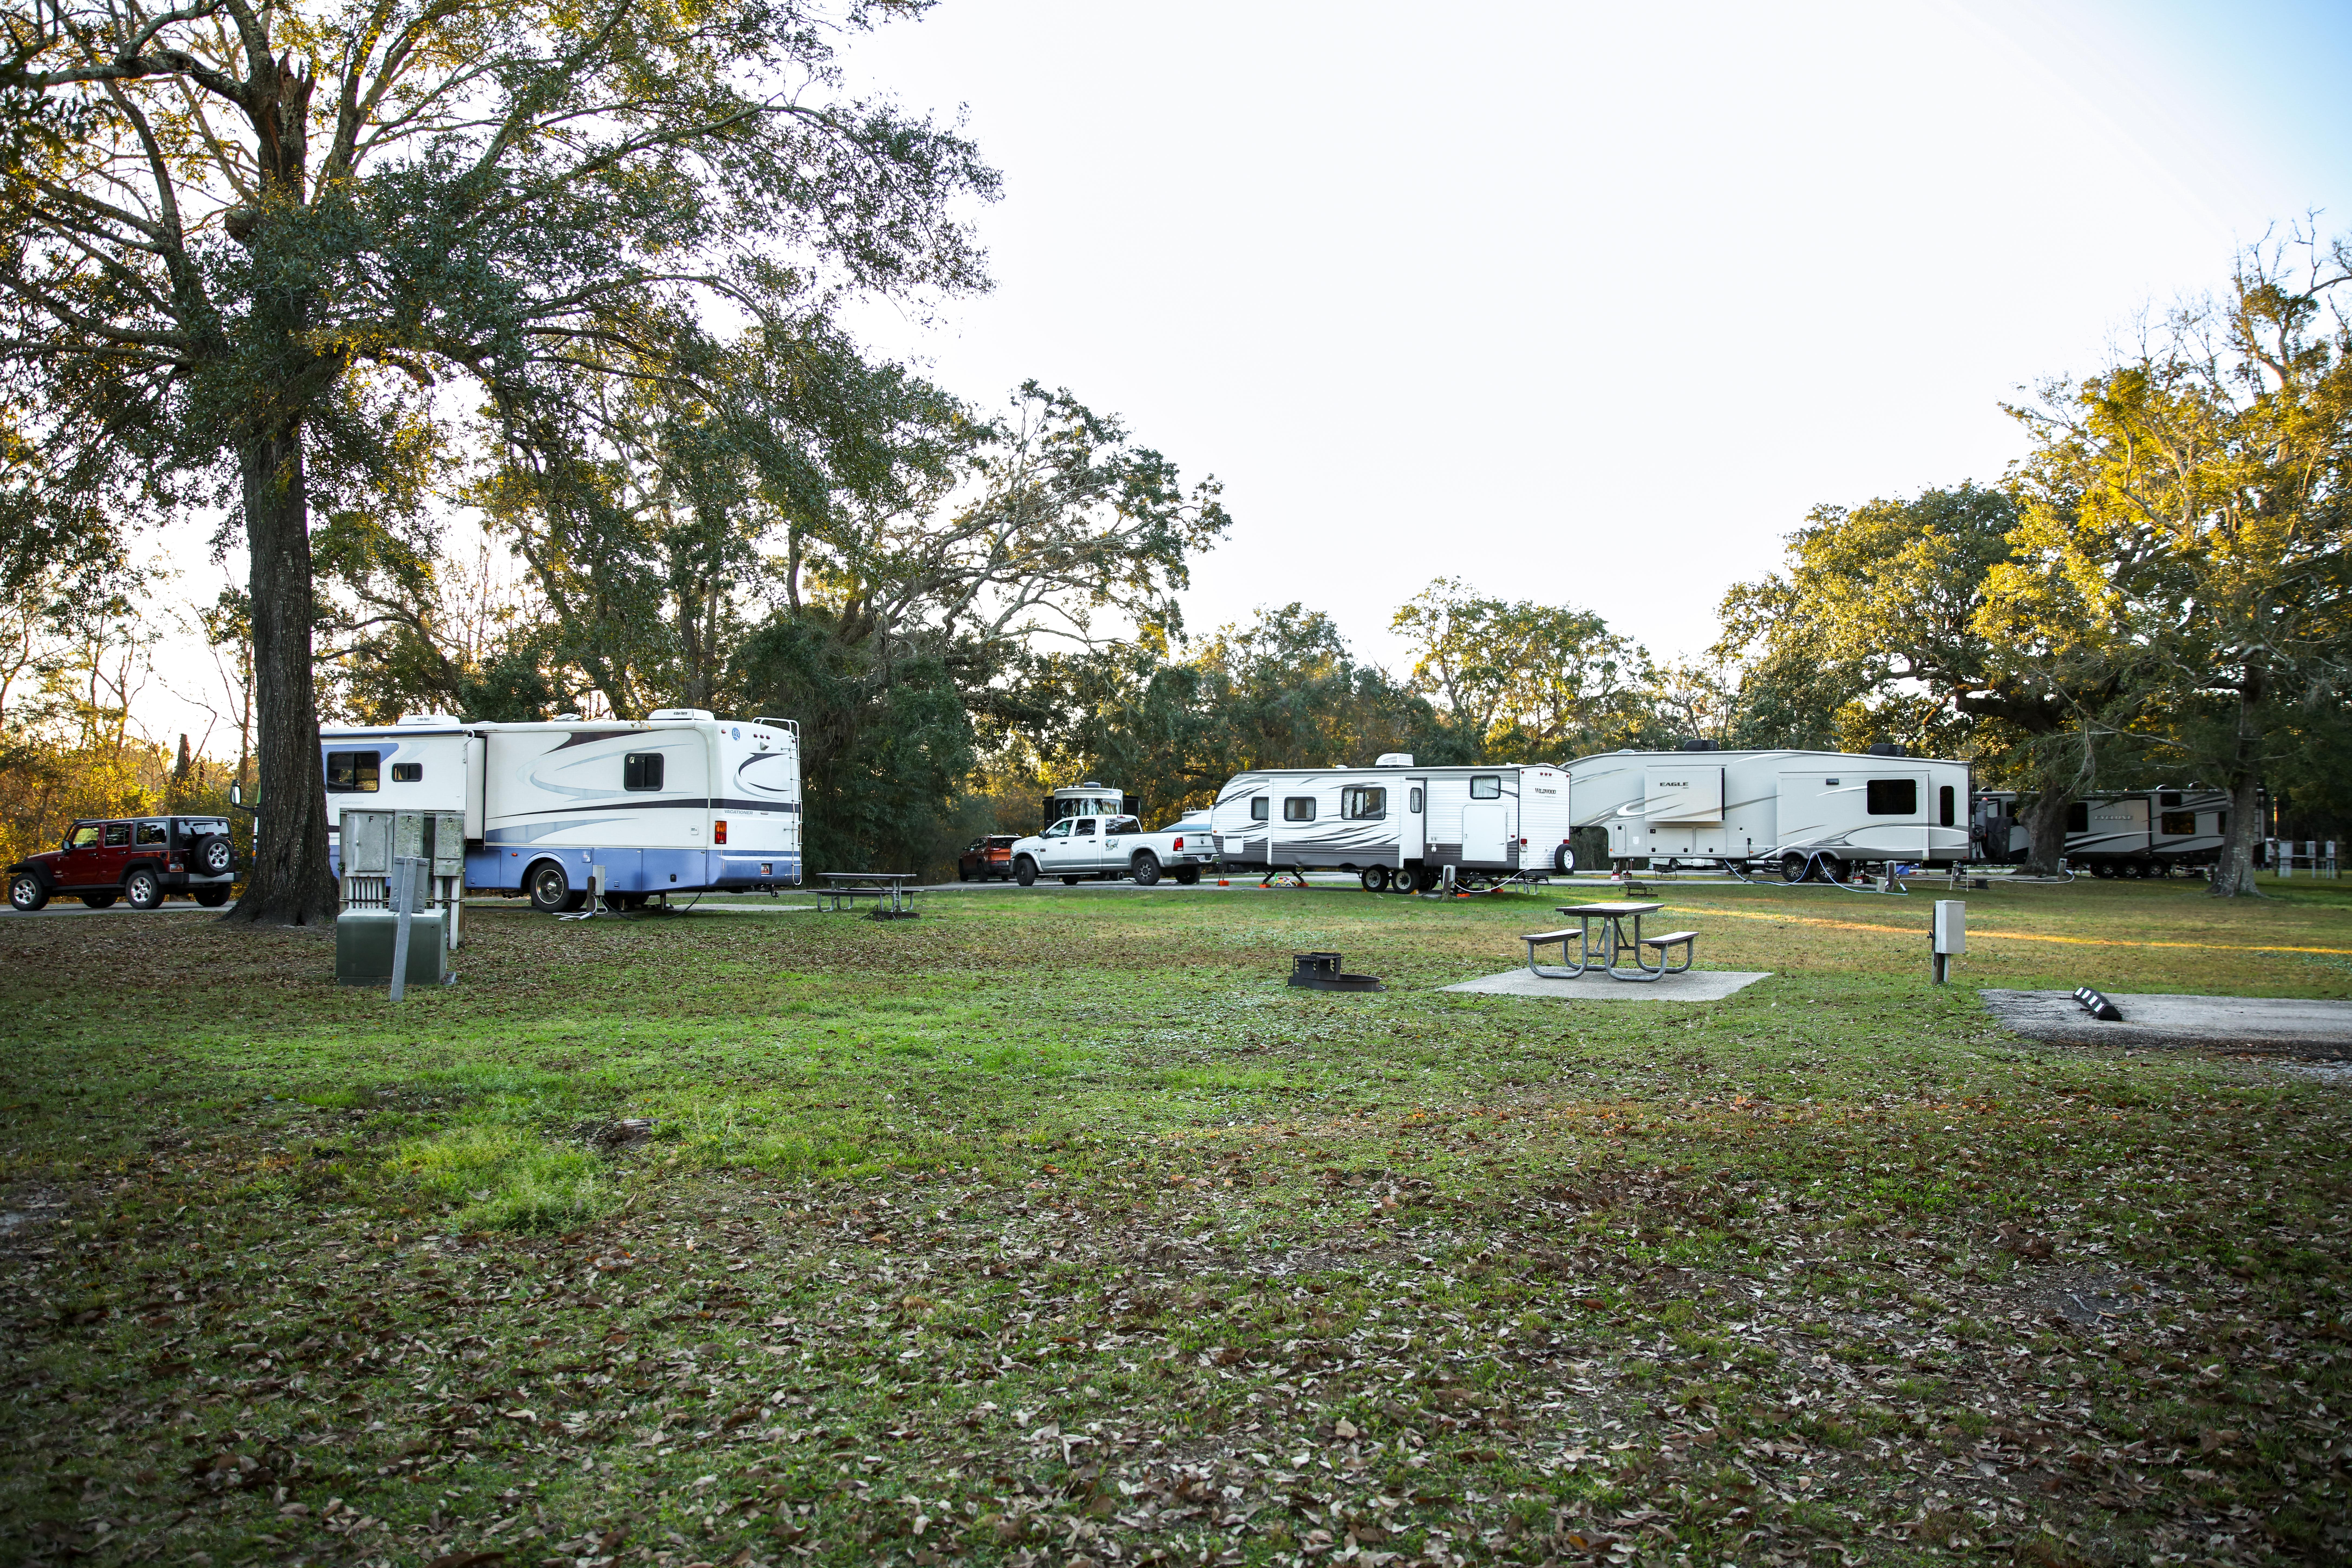 Several RVs stand in front of a grassy field.